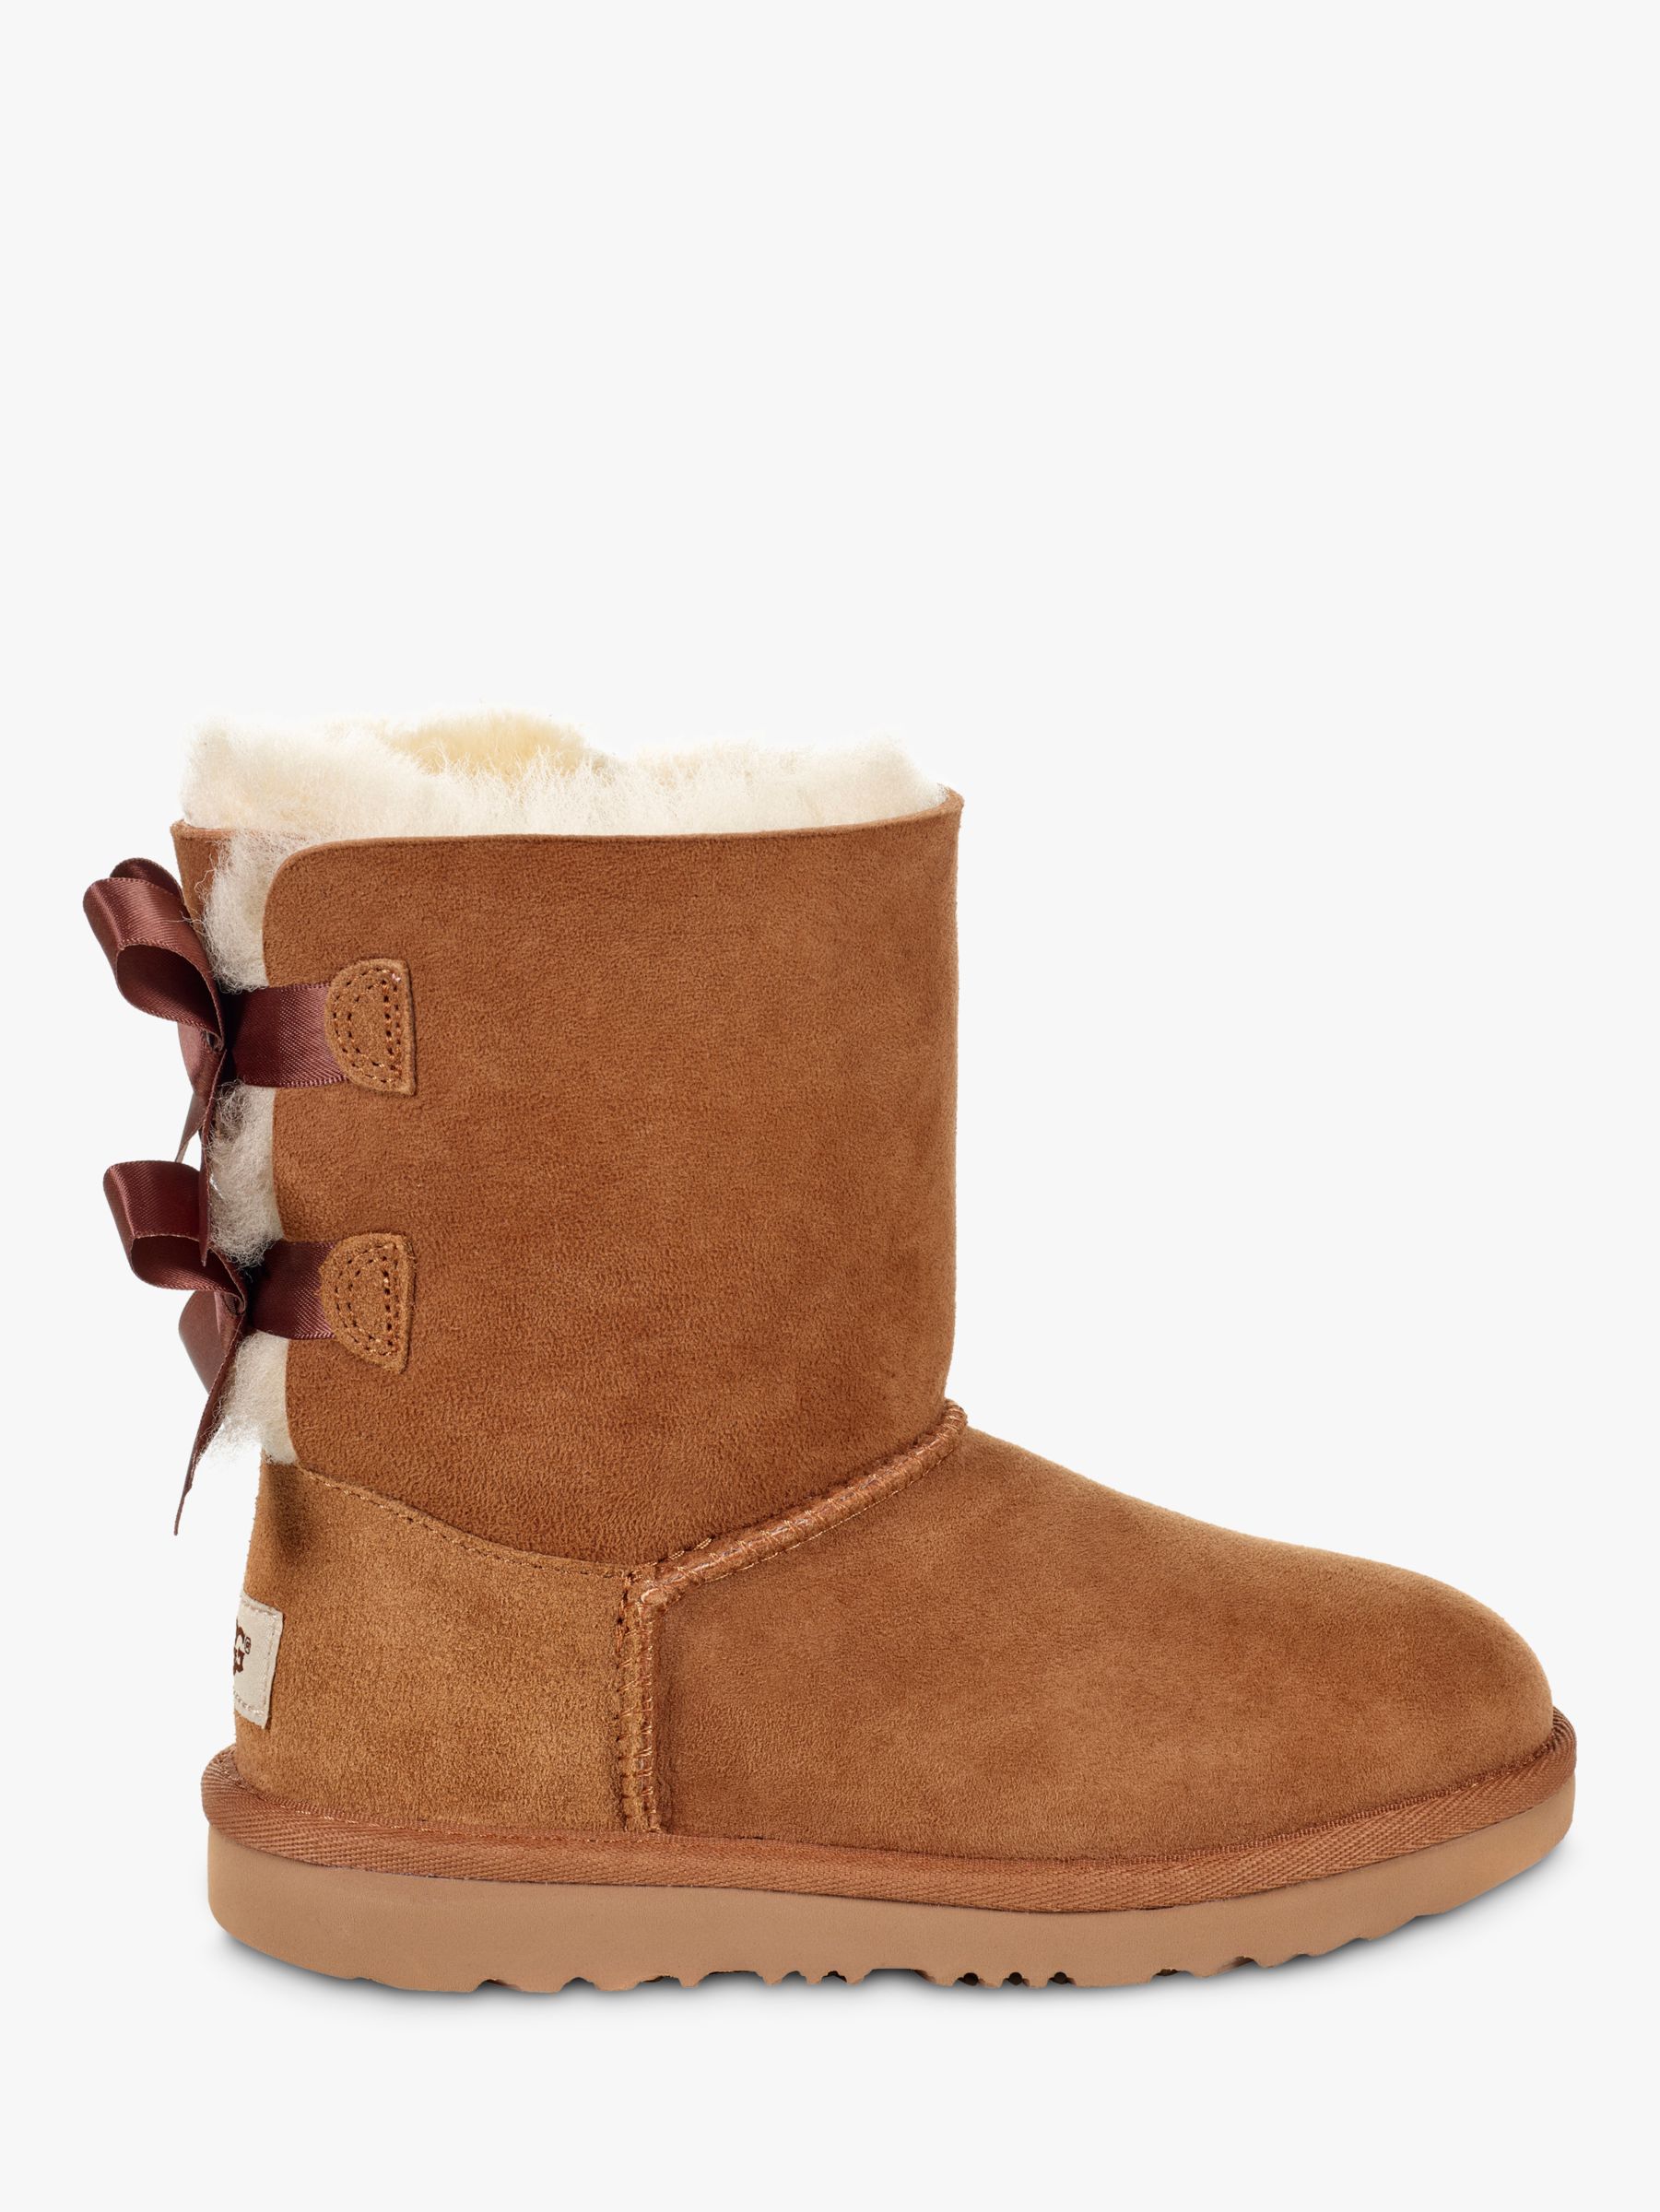 ugg bailey bow 2 boots